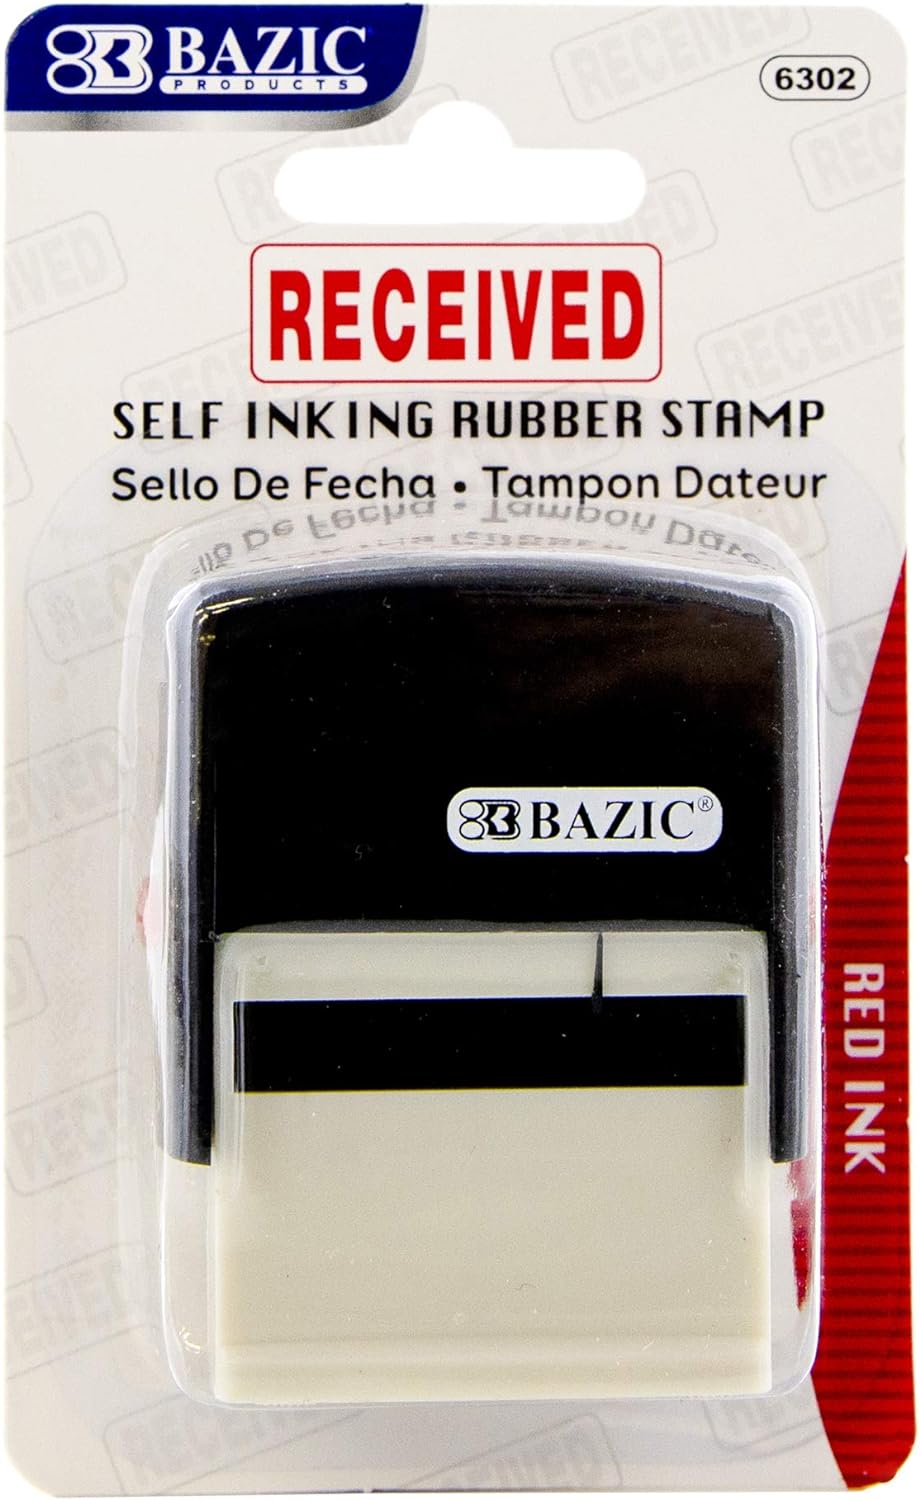 BAZIC Received Self Inking Rubber Stamp (Red Ink), Stamp Impression Size 1.41" x 0.47"